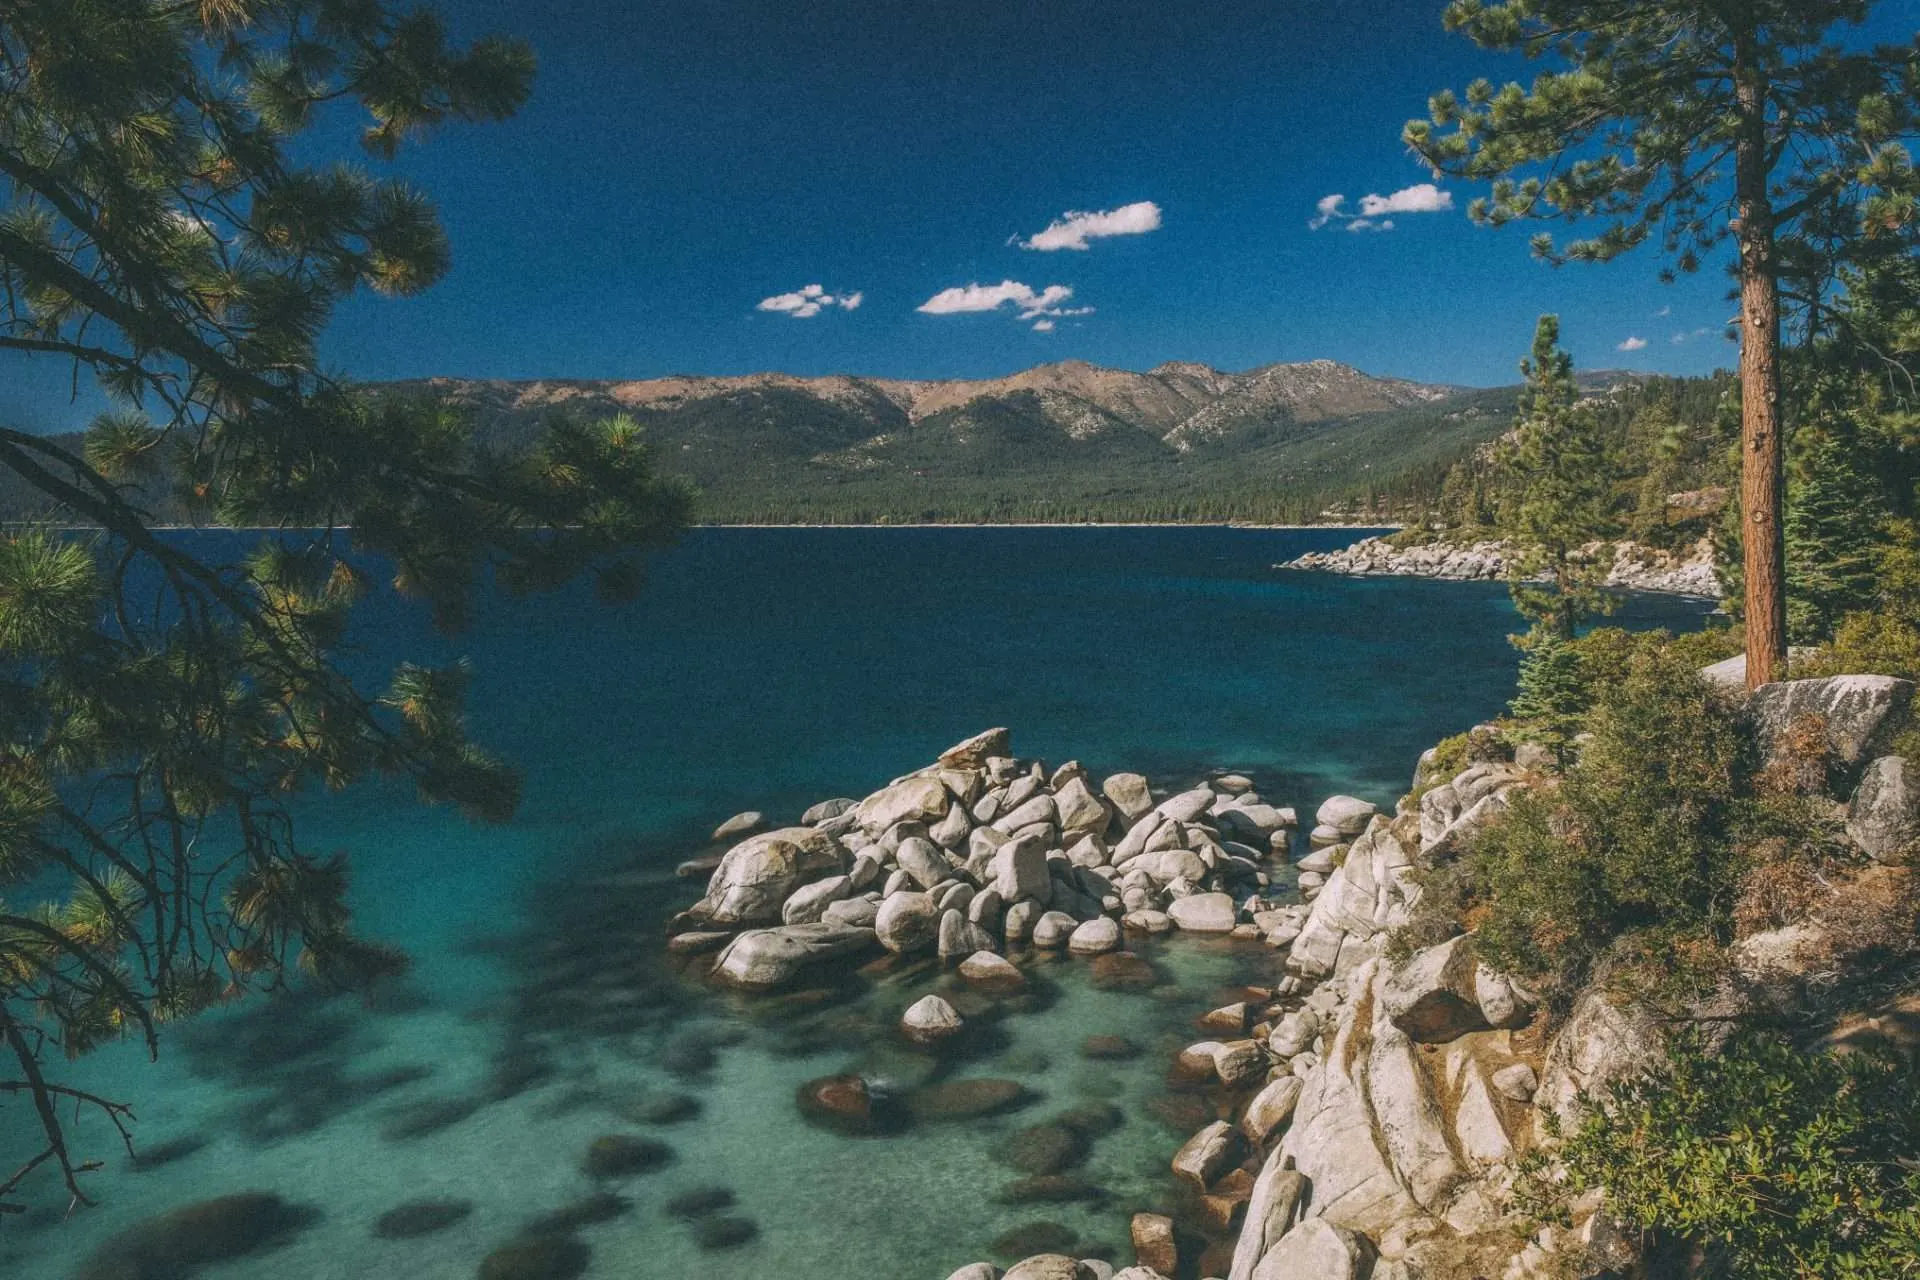 Scenic view looking out over Lake Tahoe